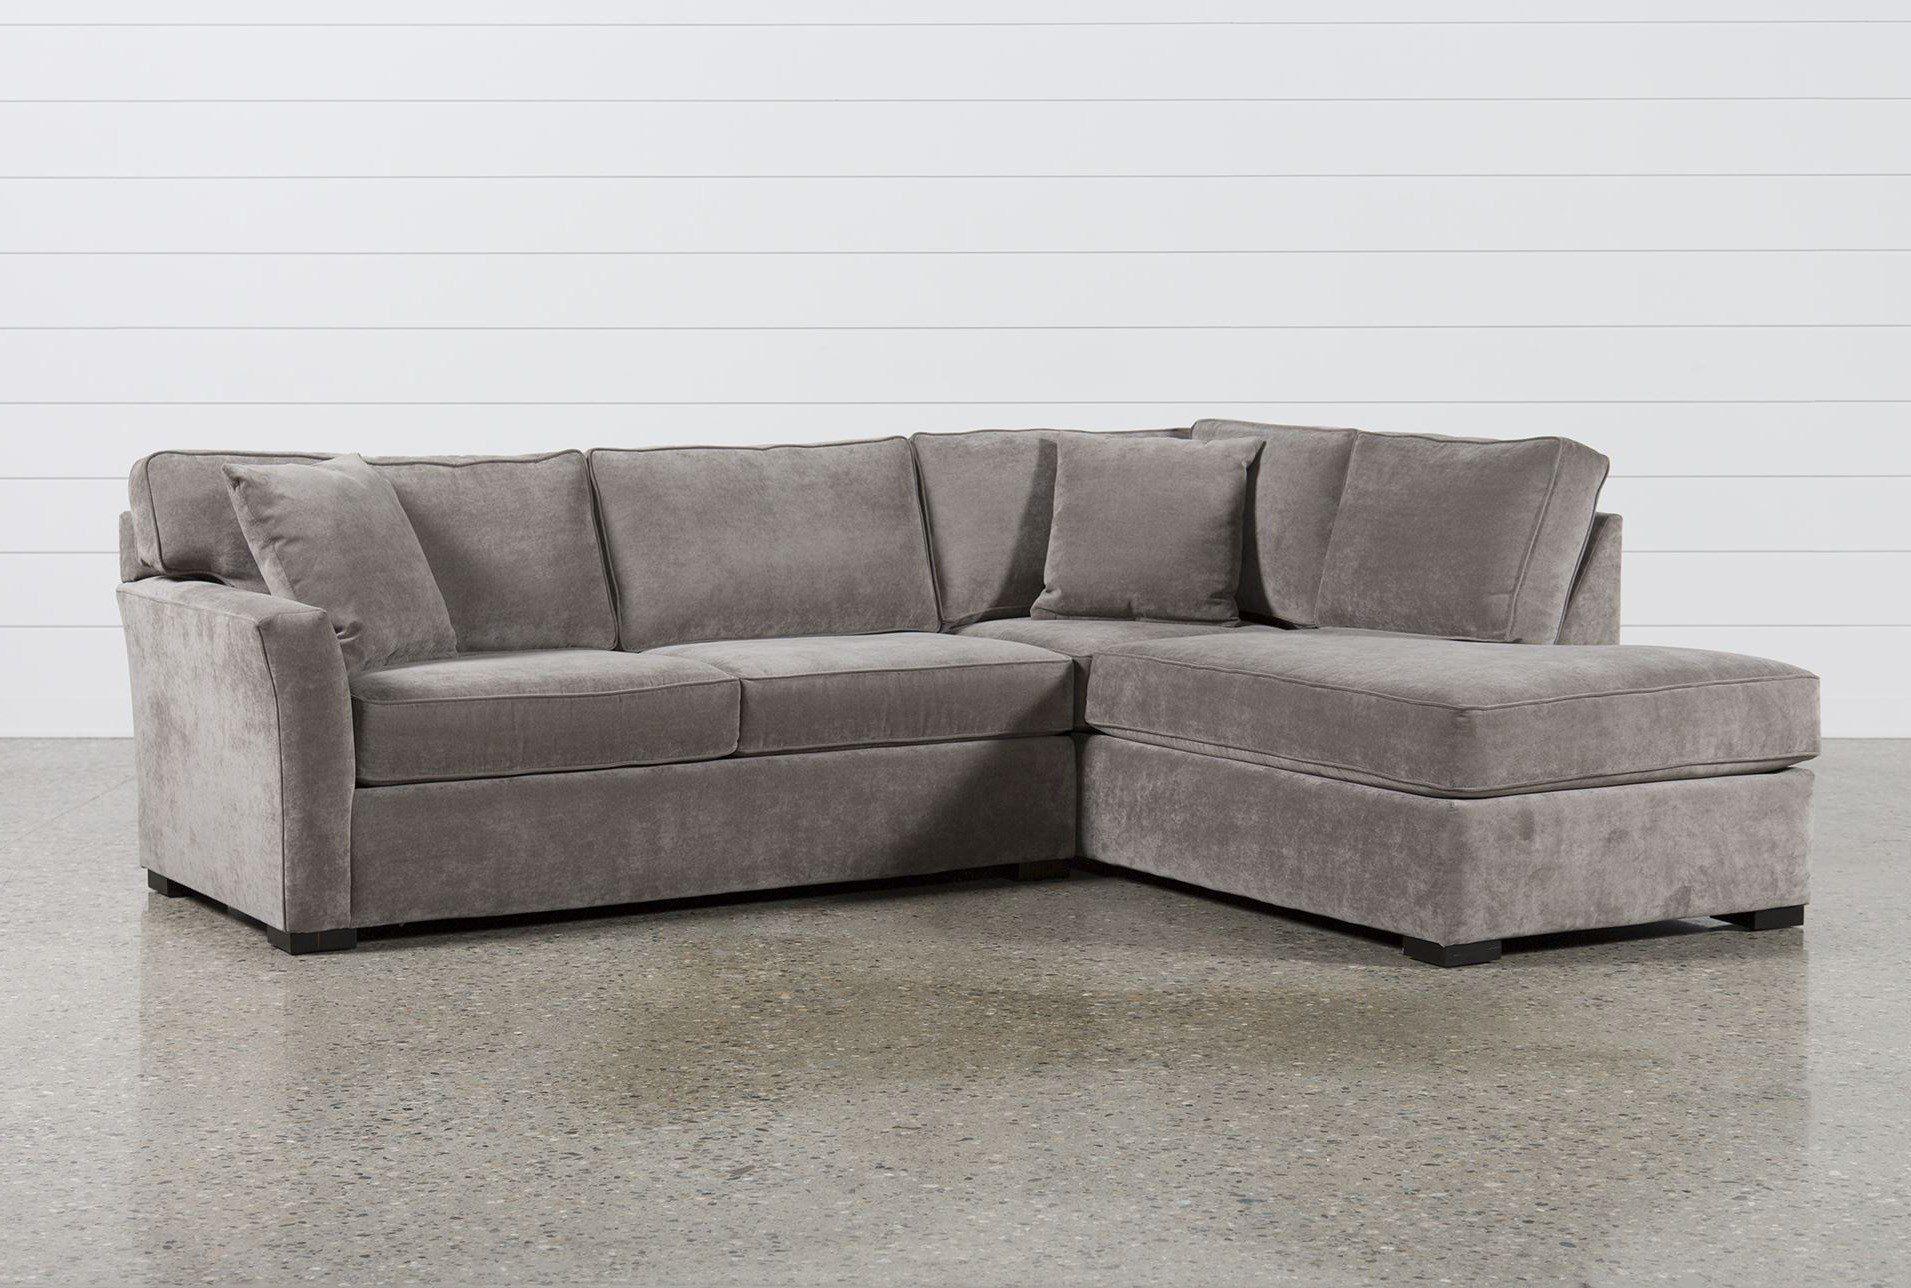 2 tone sofa chaise with storage and bed